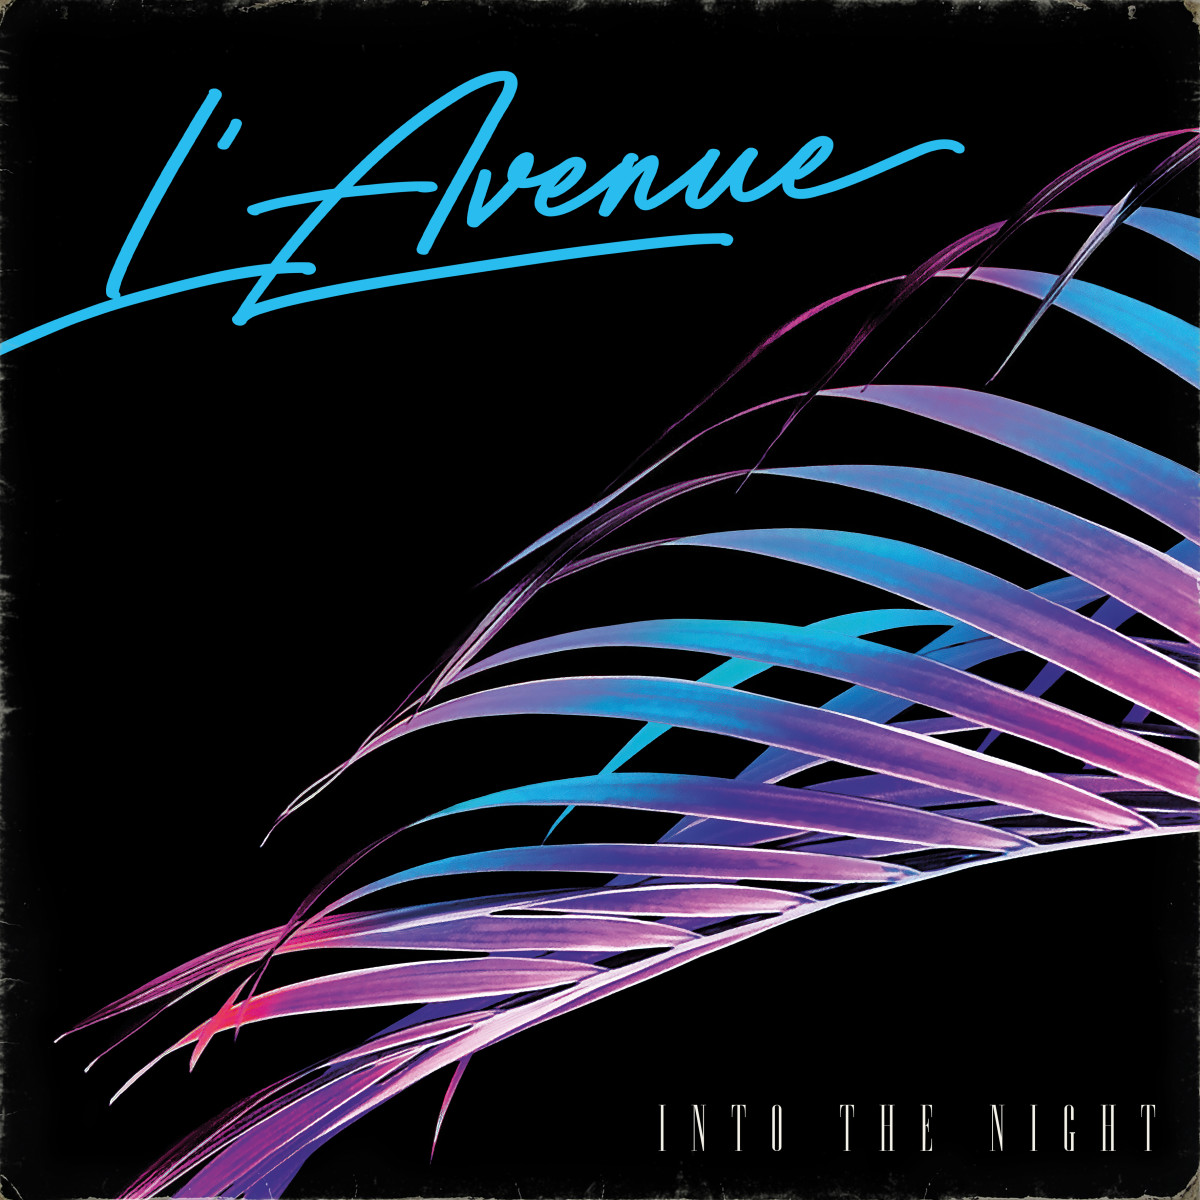 synth-album-review-into-the-night-by-lavenue